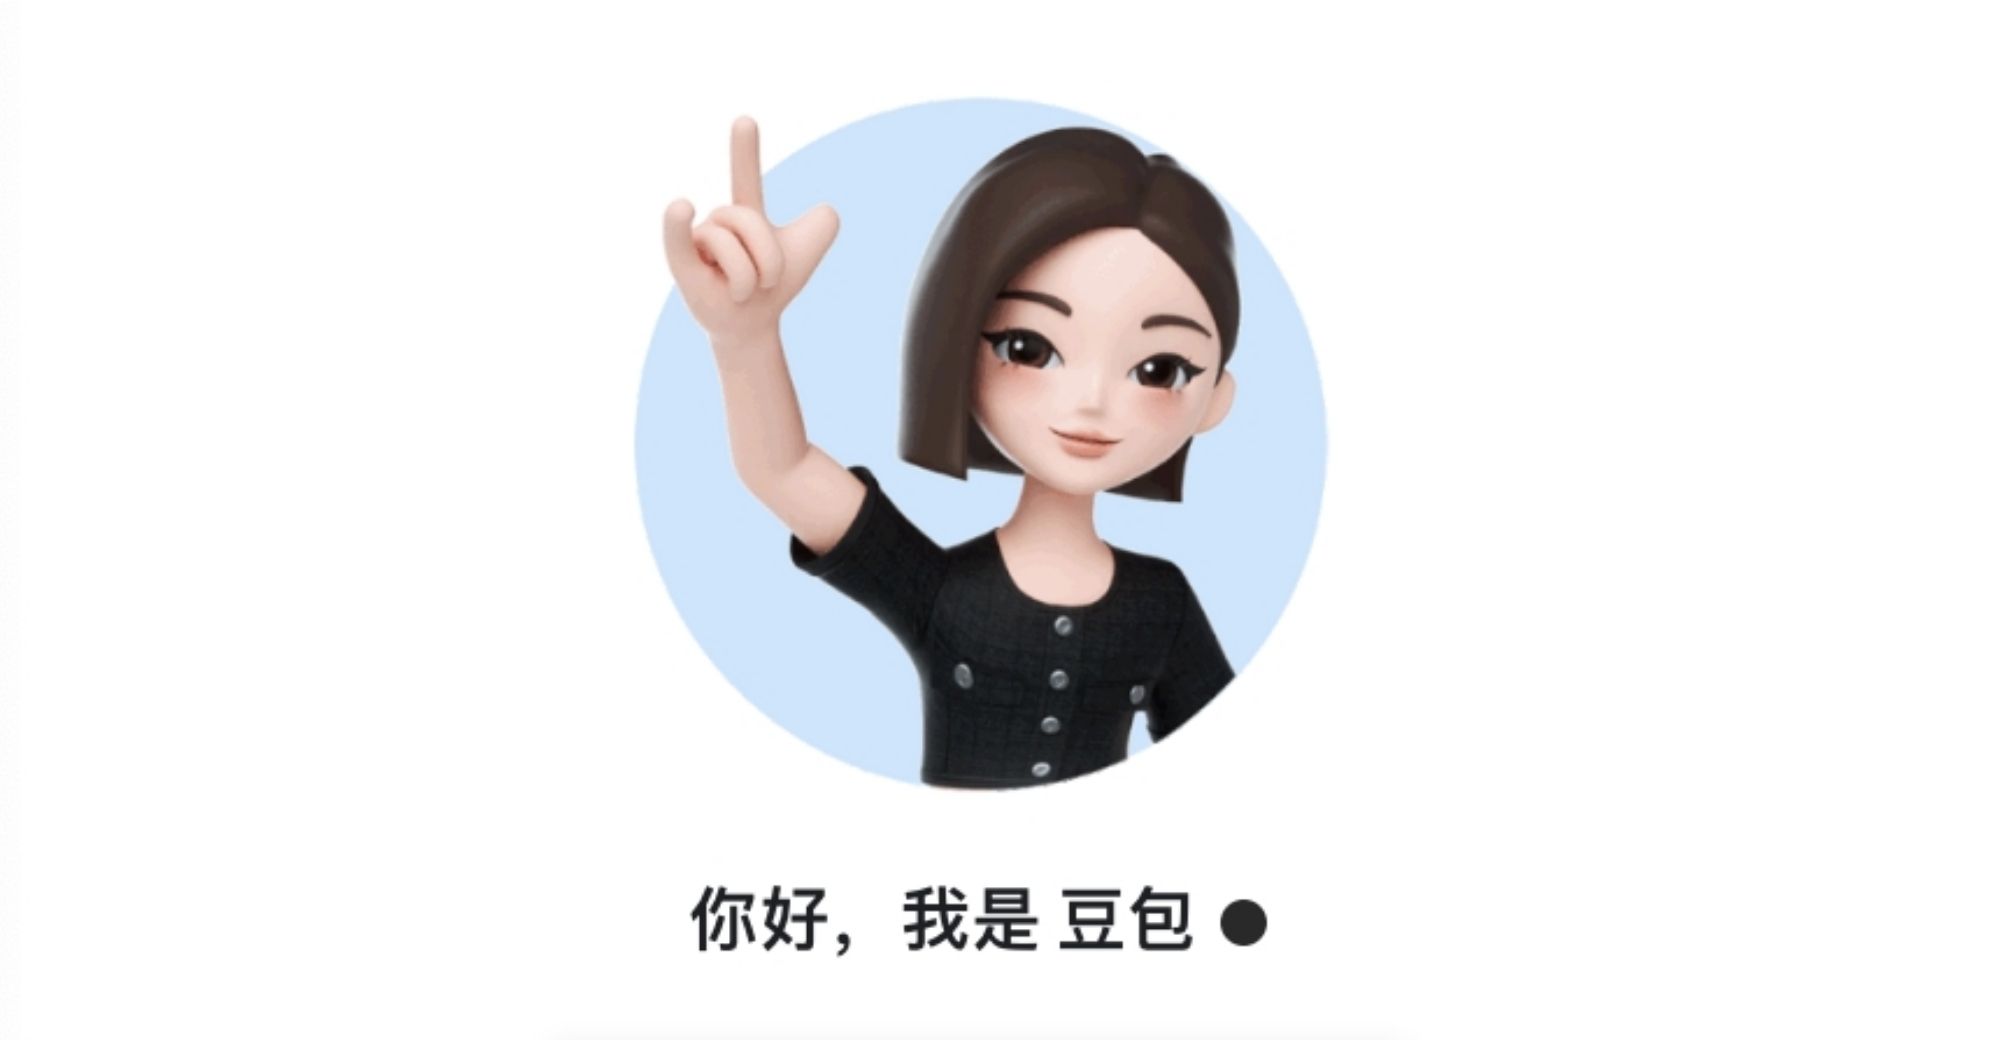 ByteDance Launches Its First Large-scale AI Conversation Product “Dou Bao”